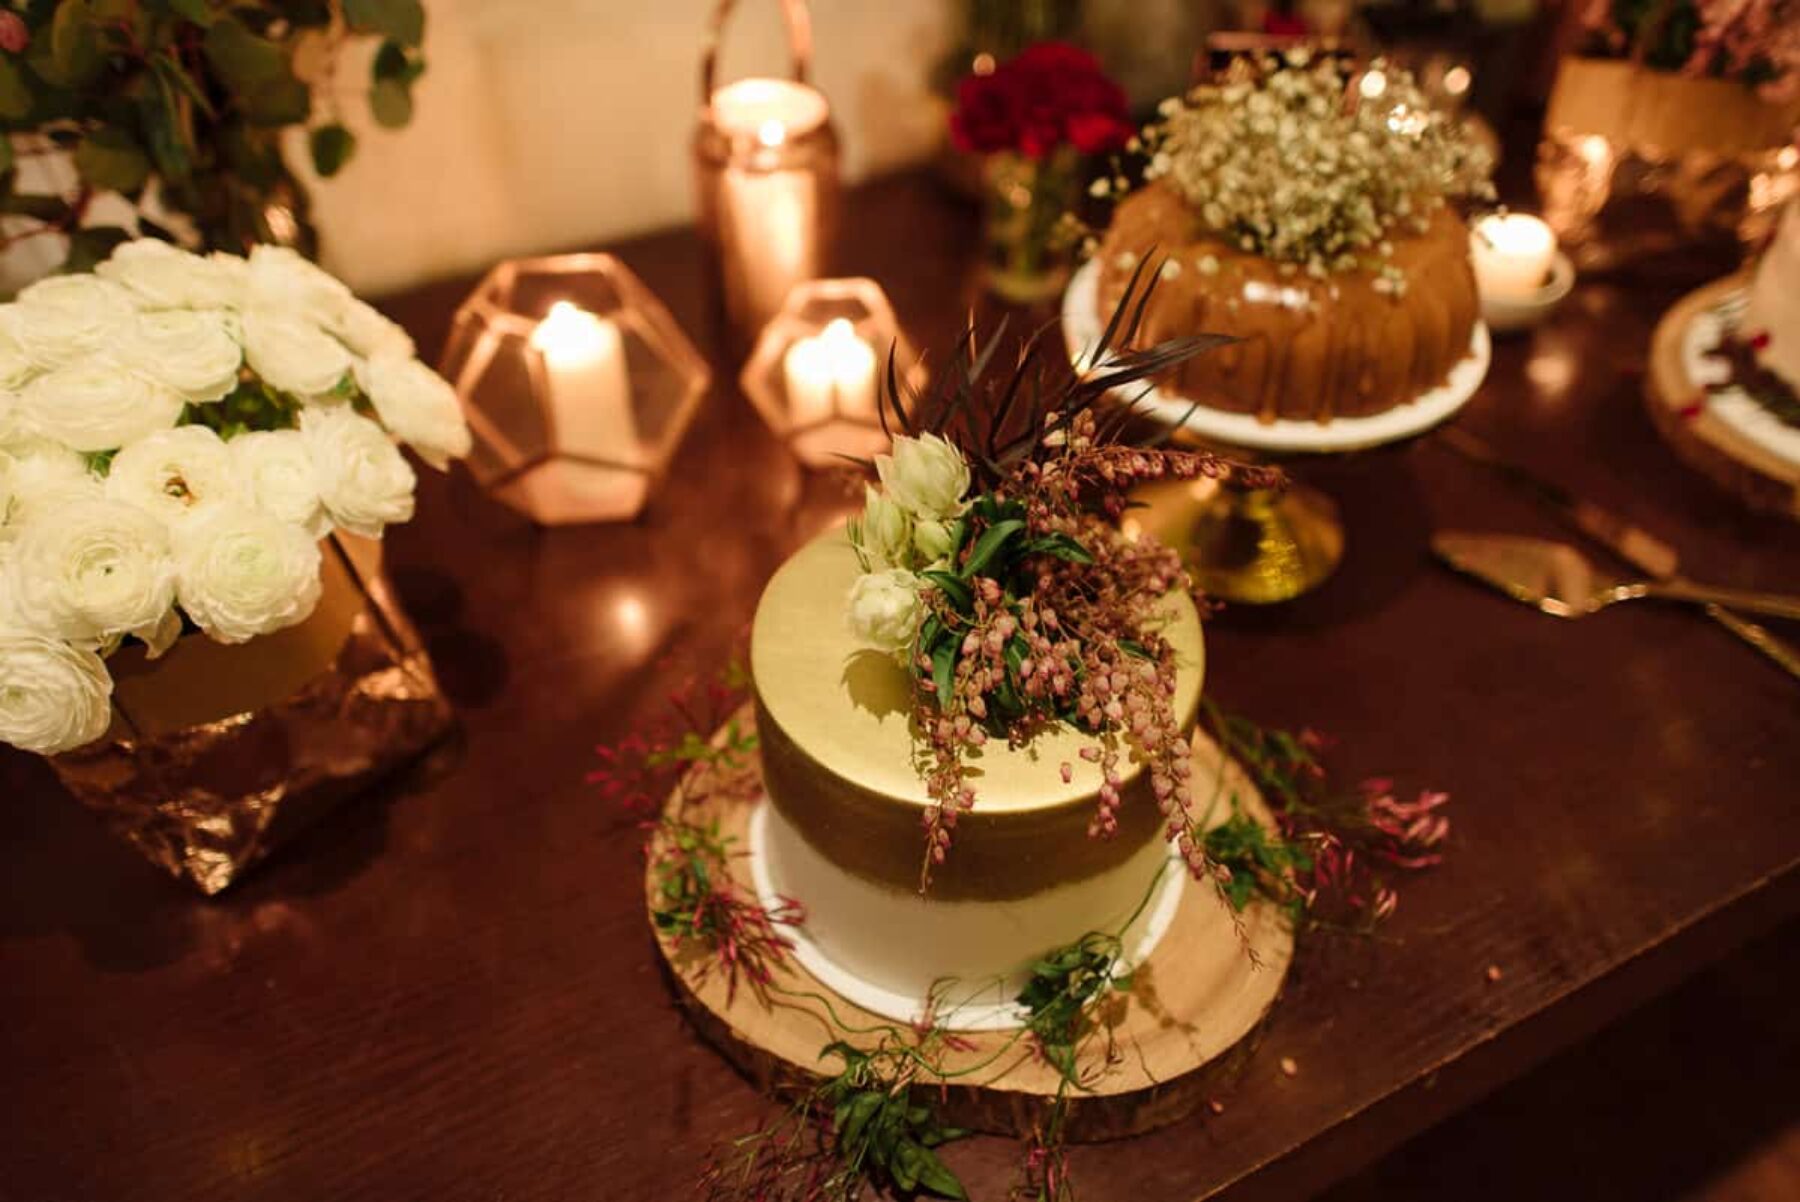 rustic wedding cake buffet / Photography by Keelan Christopher